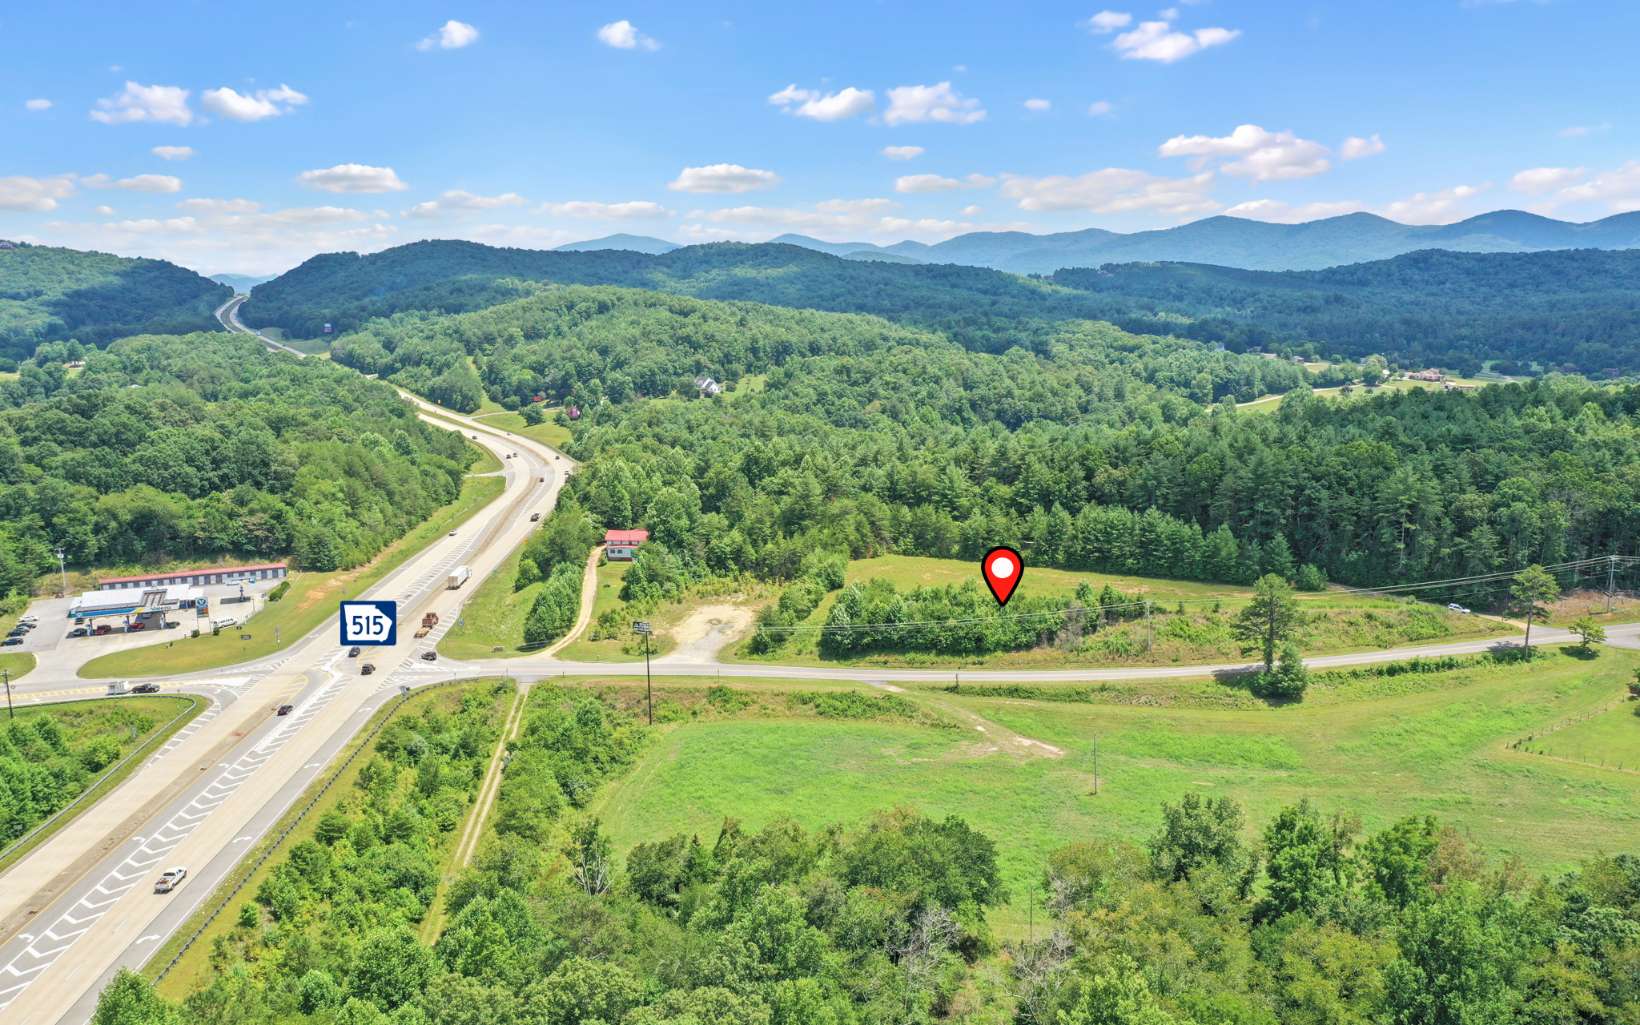 Incredible commercial opportunity with amazing HWY 515 exposure located directly in between the booming towns of Blue Ridge and Blairsville. Graded elevated lot ready to start building now overlooking HWY 515- Dual access zoned C3 with Power and City water available. Exceptional value for hard to find high traffic HWY 515 exposure.